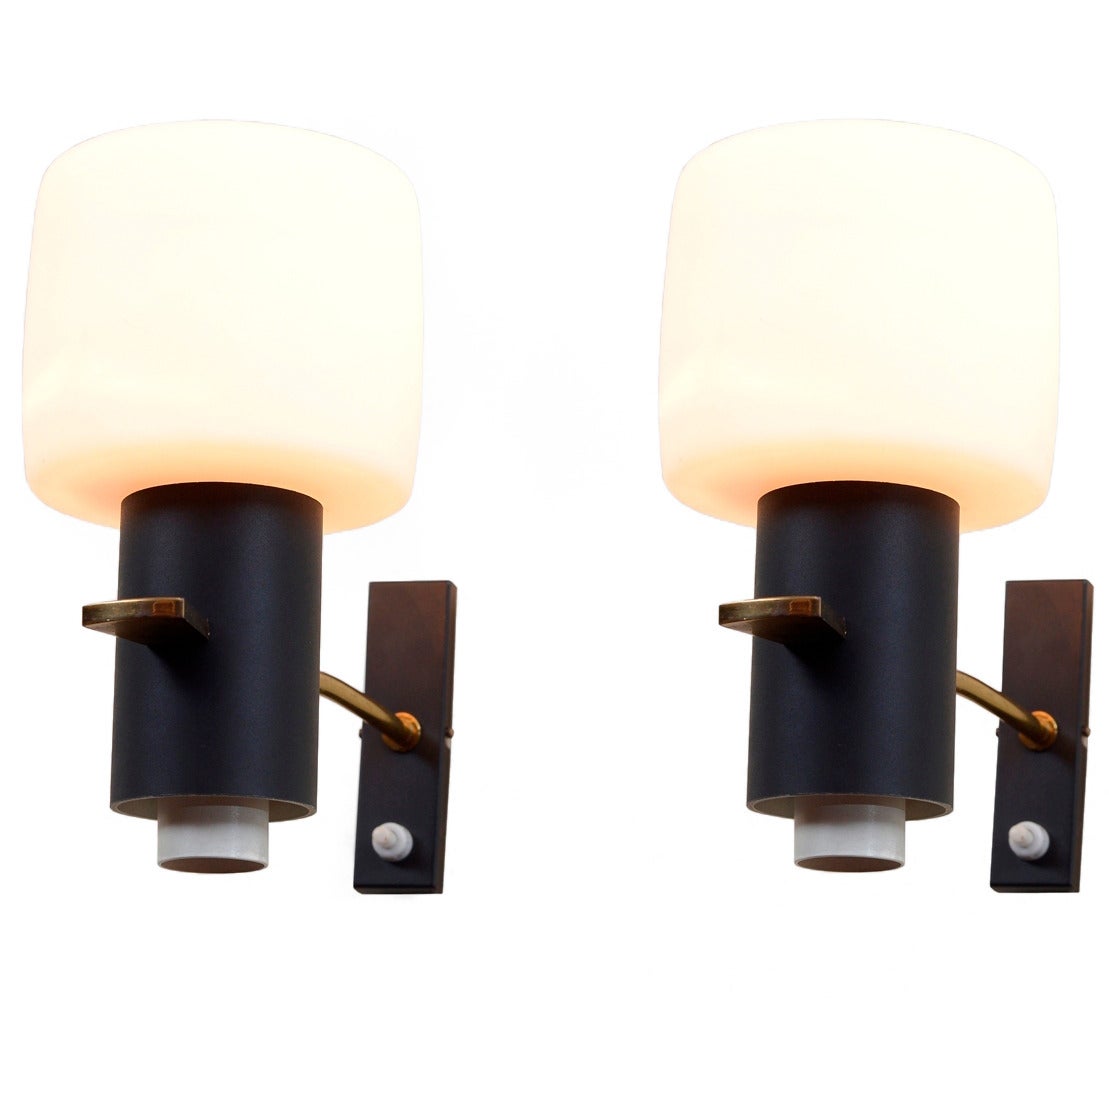 Boris Lacroix Attributed Midcentury Pair of Wall Lamps